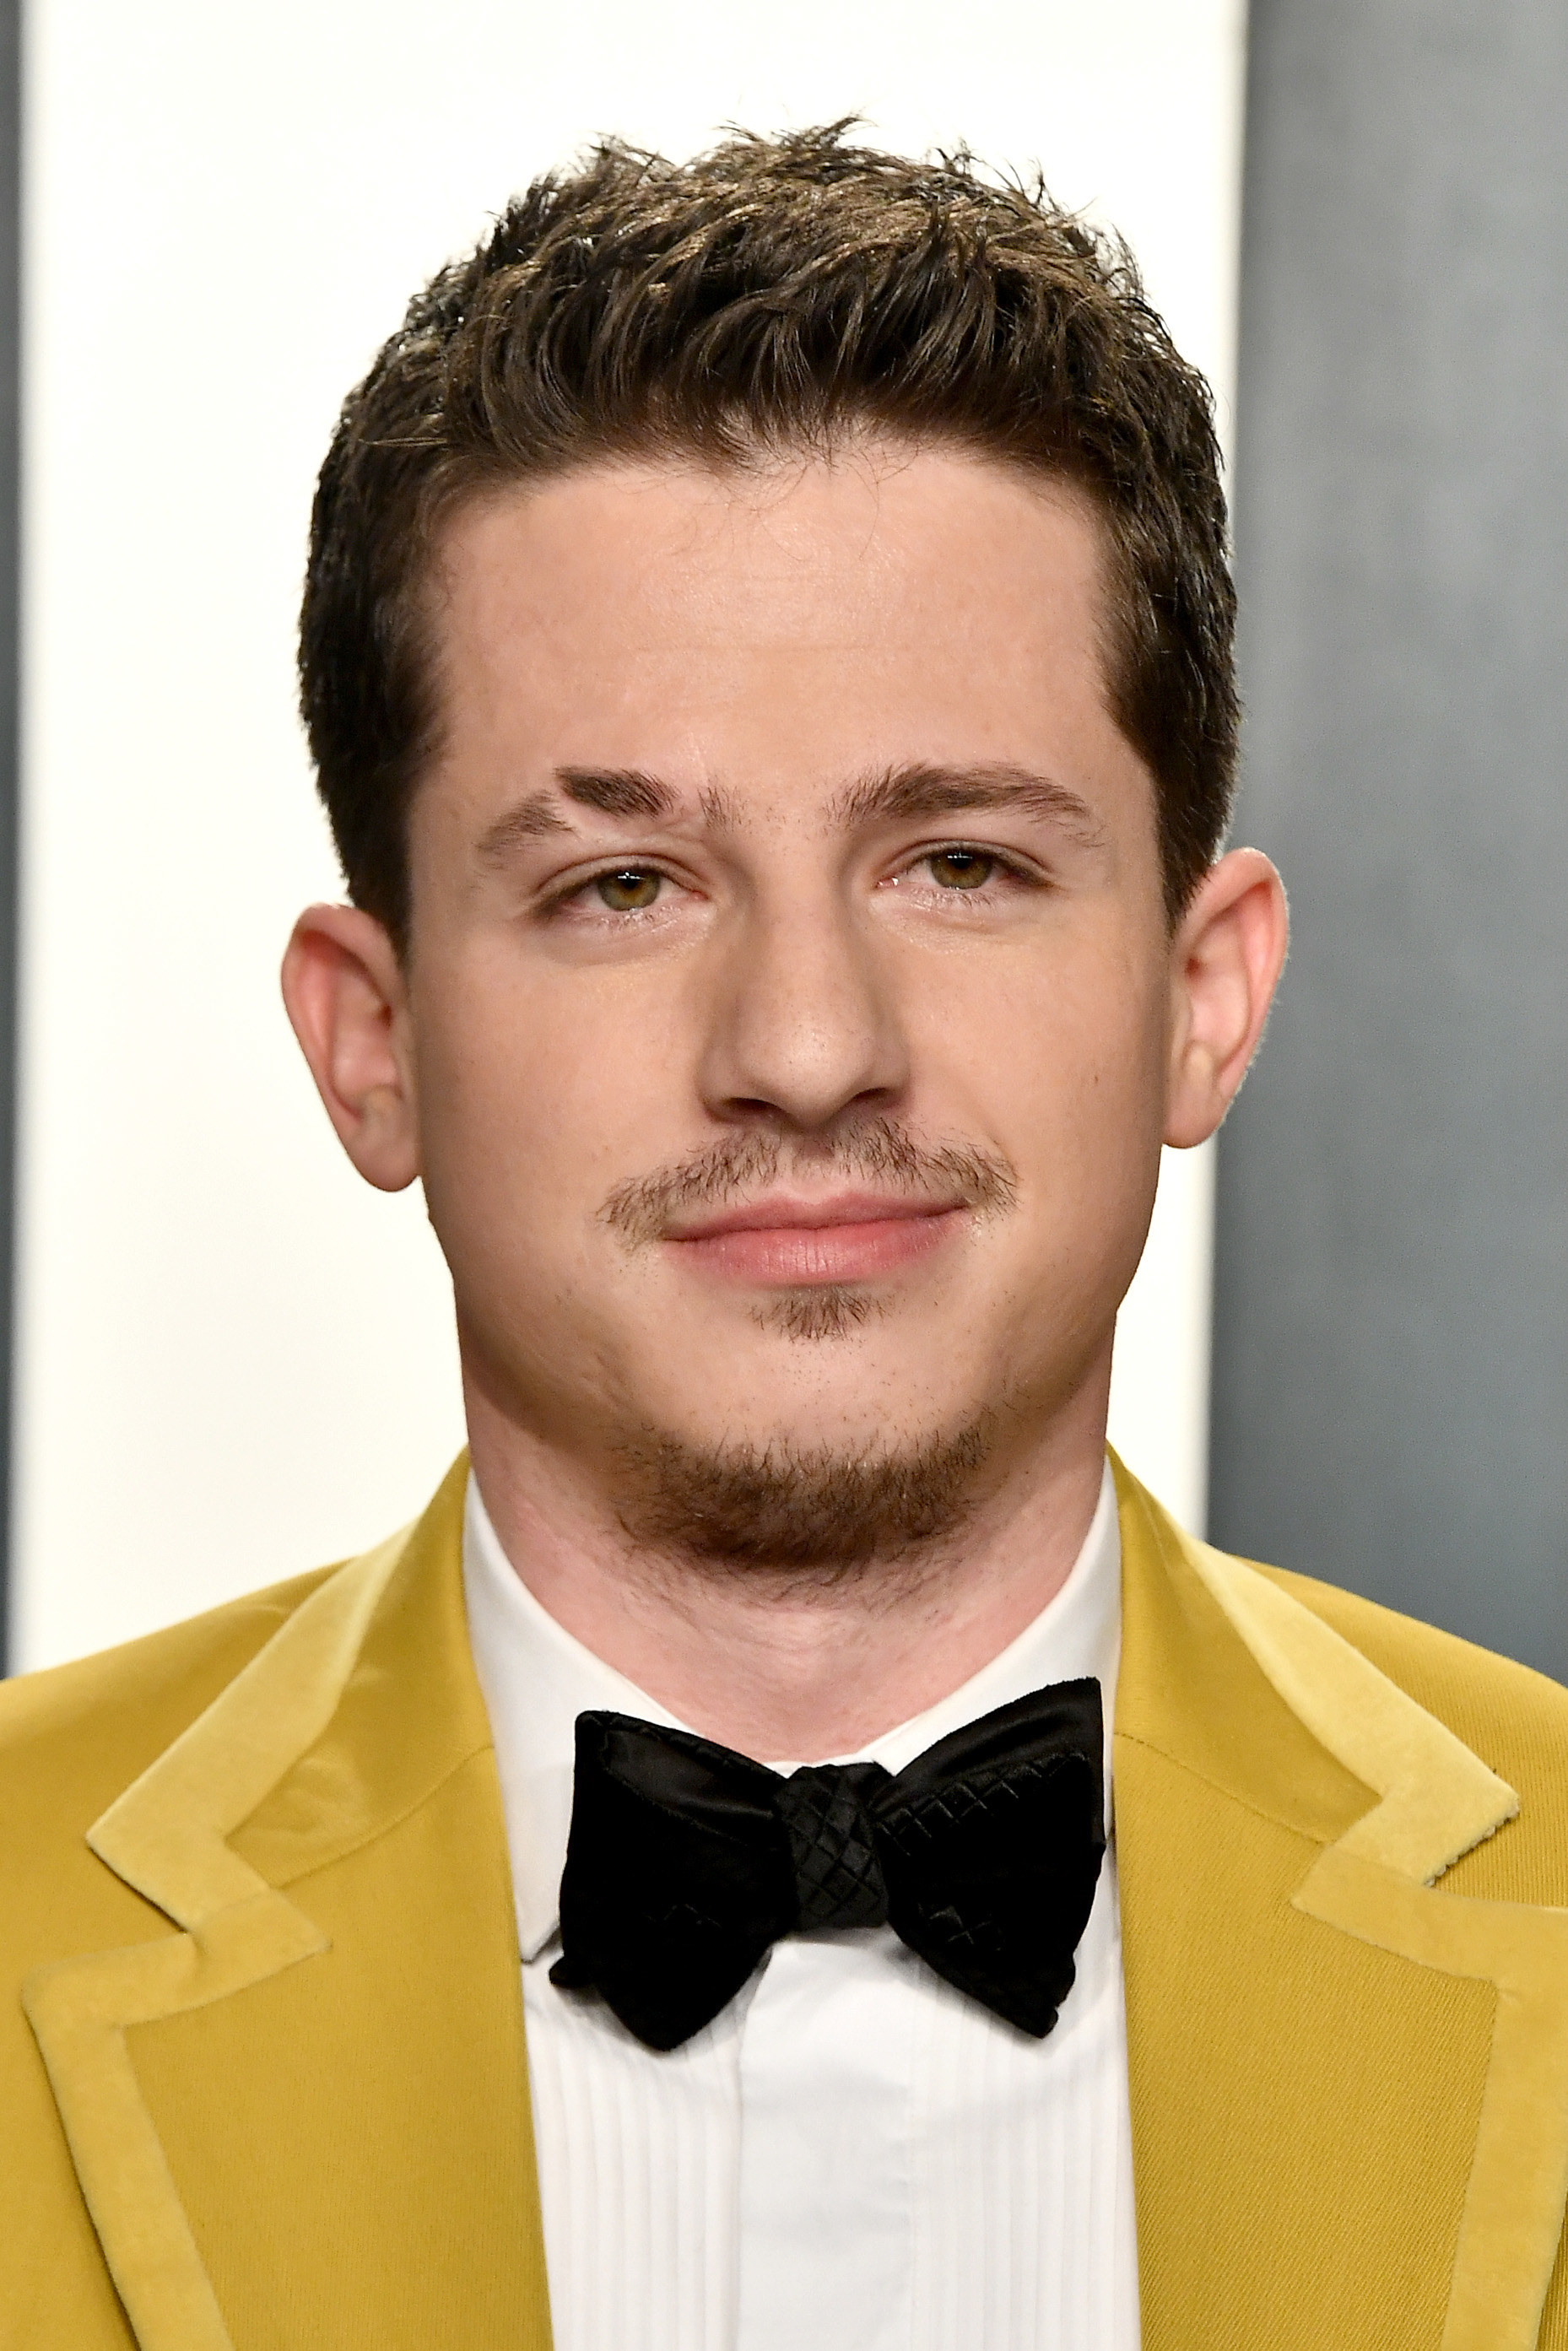 Charlie Puth Has Recorded A Song With Alicia Keys - Noise11.com